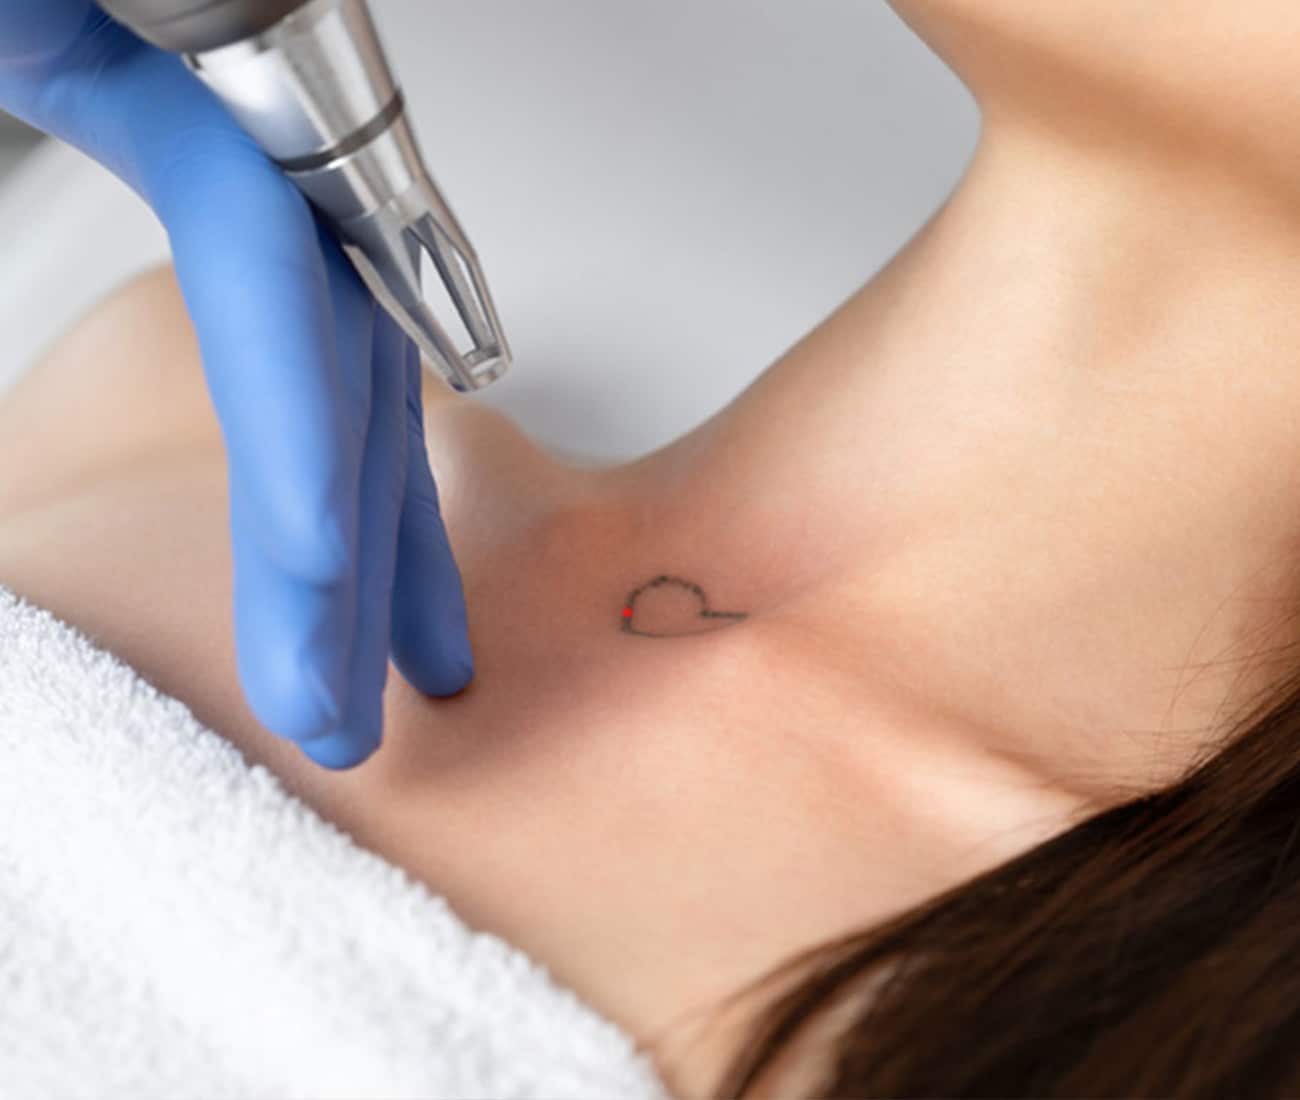 Tattoo Removal Treatment in Indore | 88710 01500 | Tattoo Removal Treatment  Specialist in Indore, Best Cosmetologist for Tattoo removal in Indore, Tattoo  Removal Treatment Clinic in Indore, Best Dermatologist in Indore